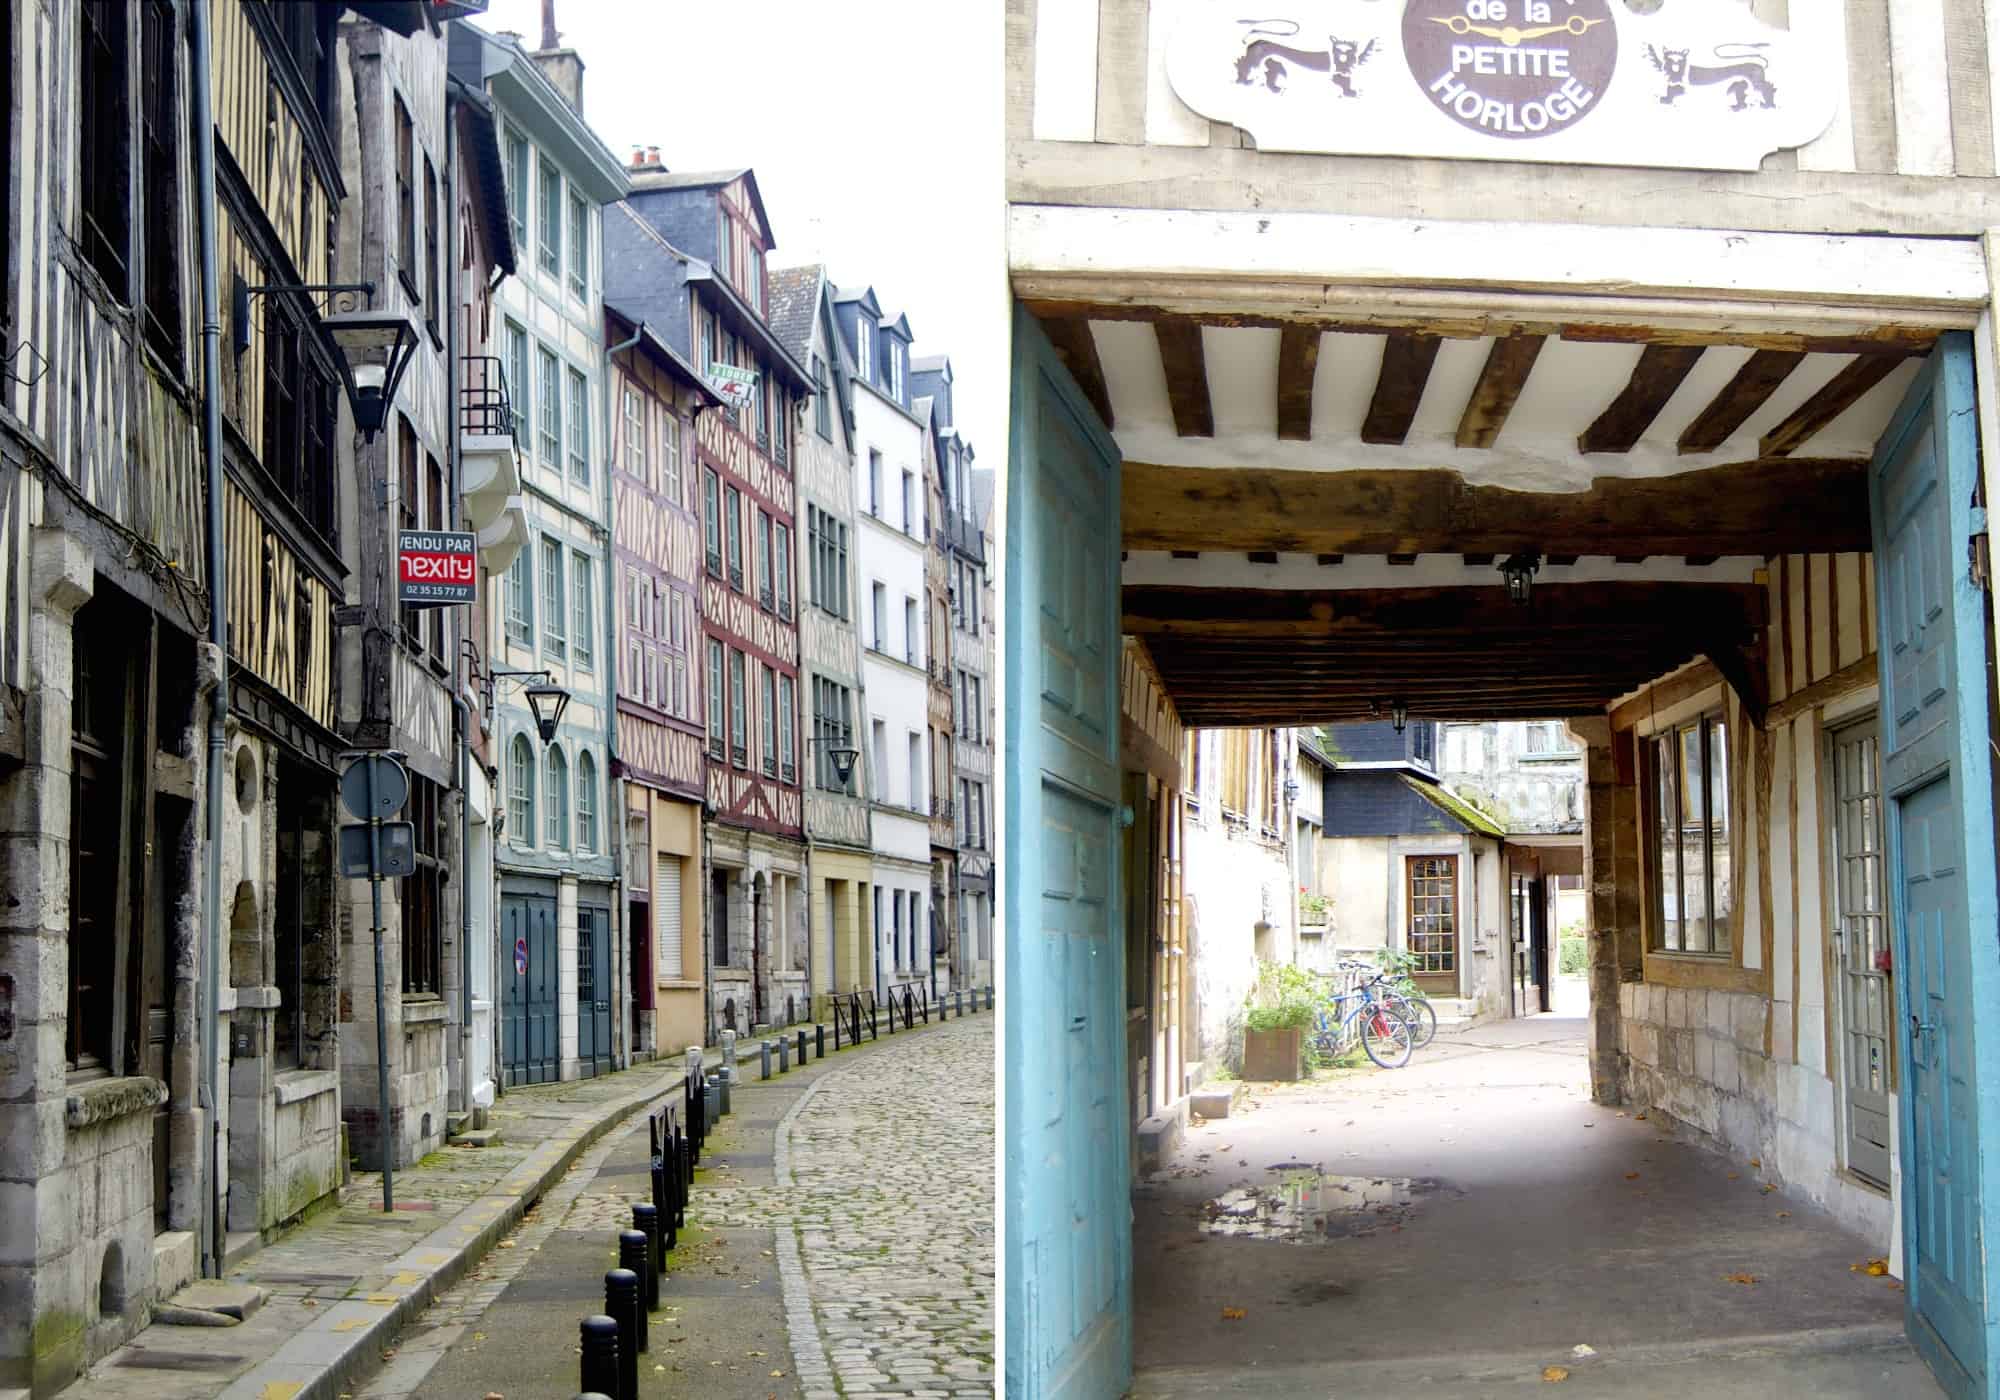 A weekend jaunt through the rustic streets of Rouen.